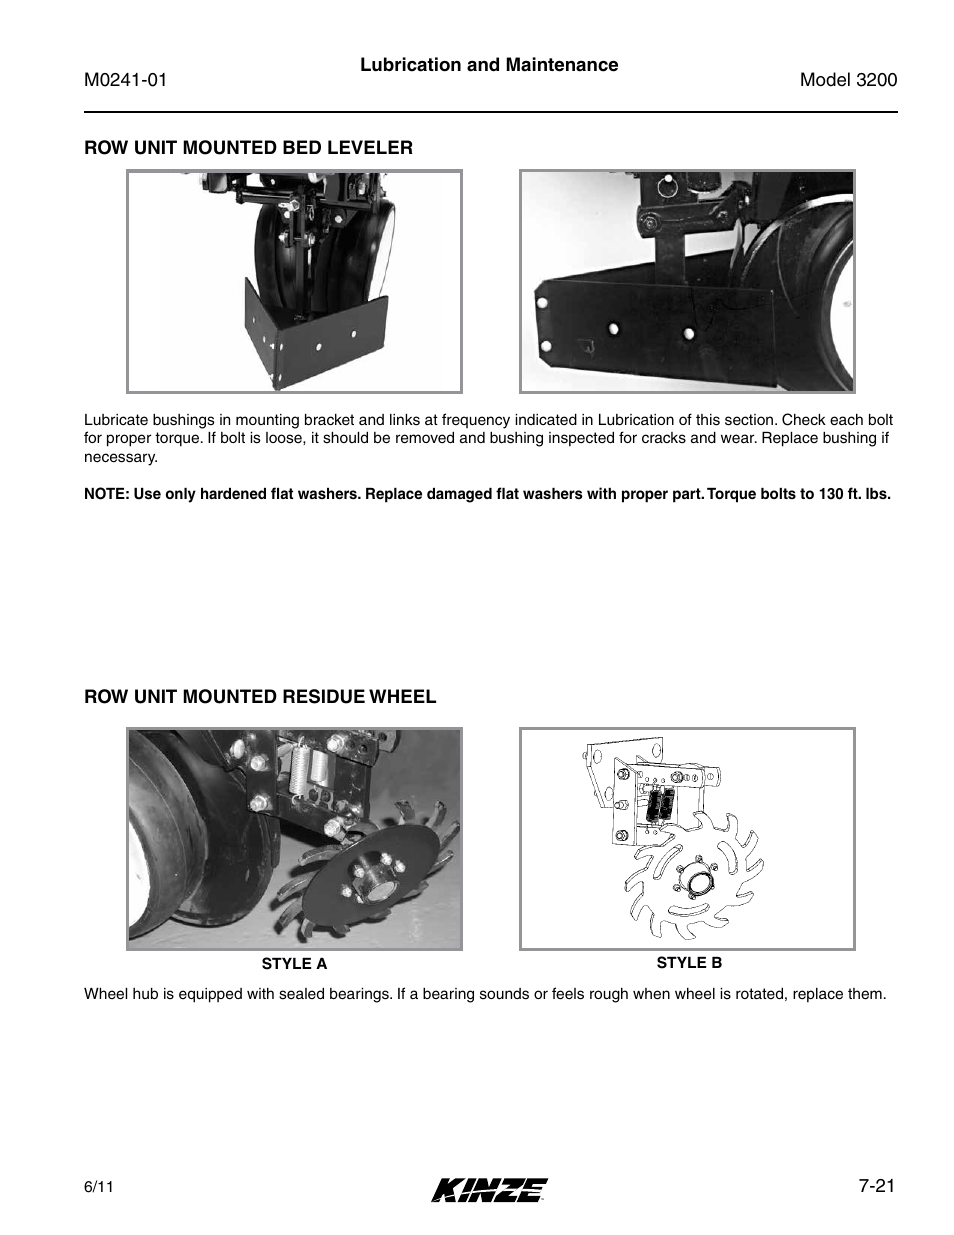 Row unit mounted bed leveler, Row unit mounted residue wheel, Row unit mounted bed leveler -21 | Row unit mounted residue wheel -21 | Kinze 3200 Wing-Fold Planter Rev. 7/14 User Manual | Page 161 / 192